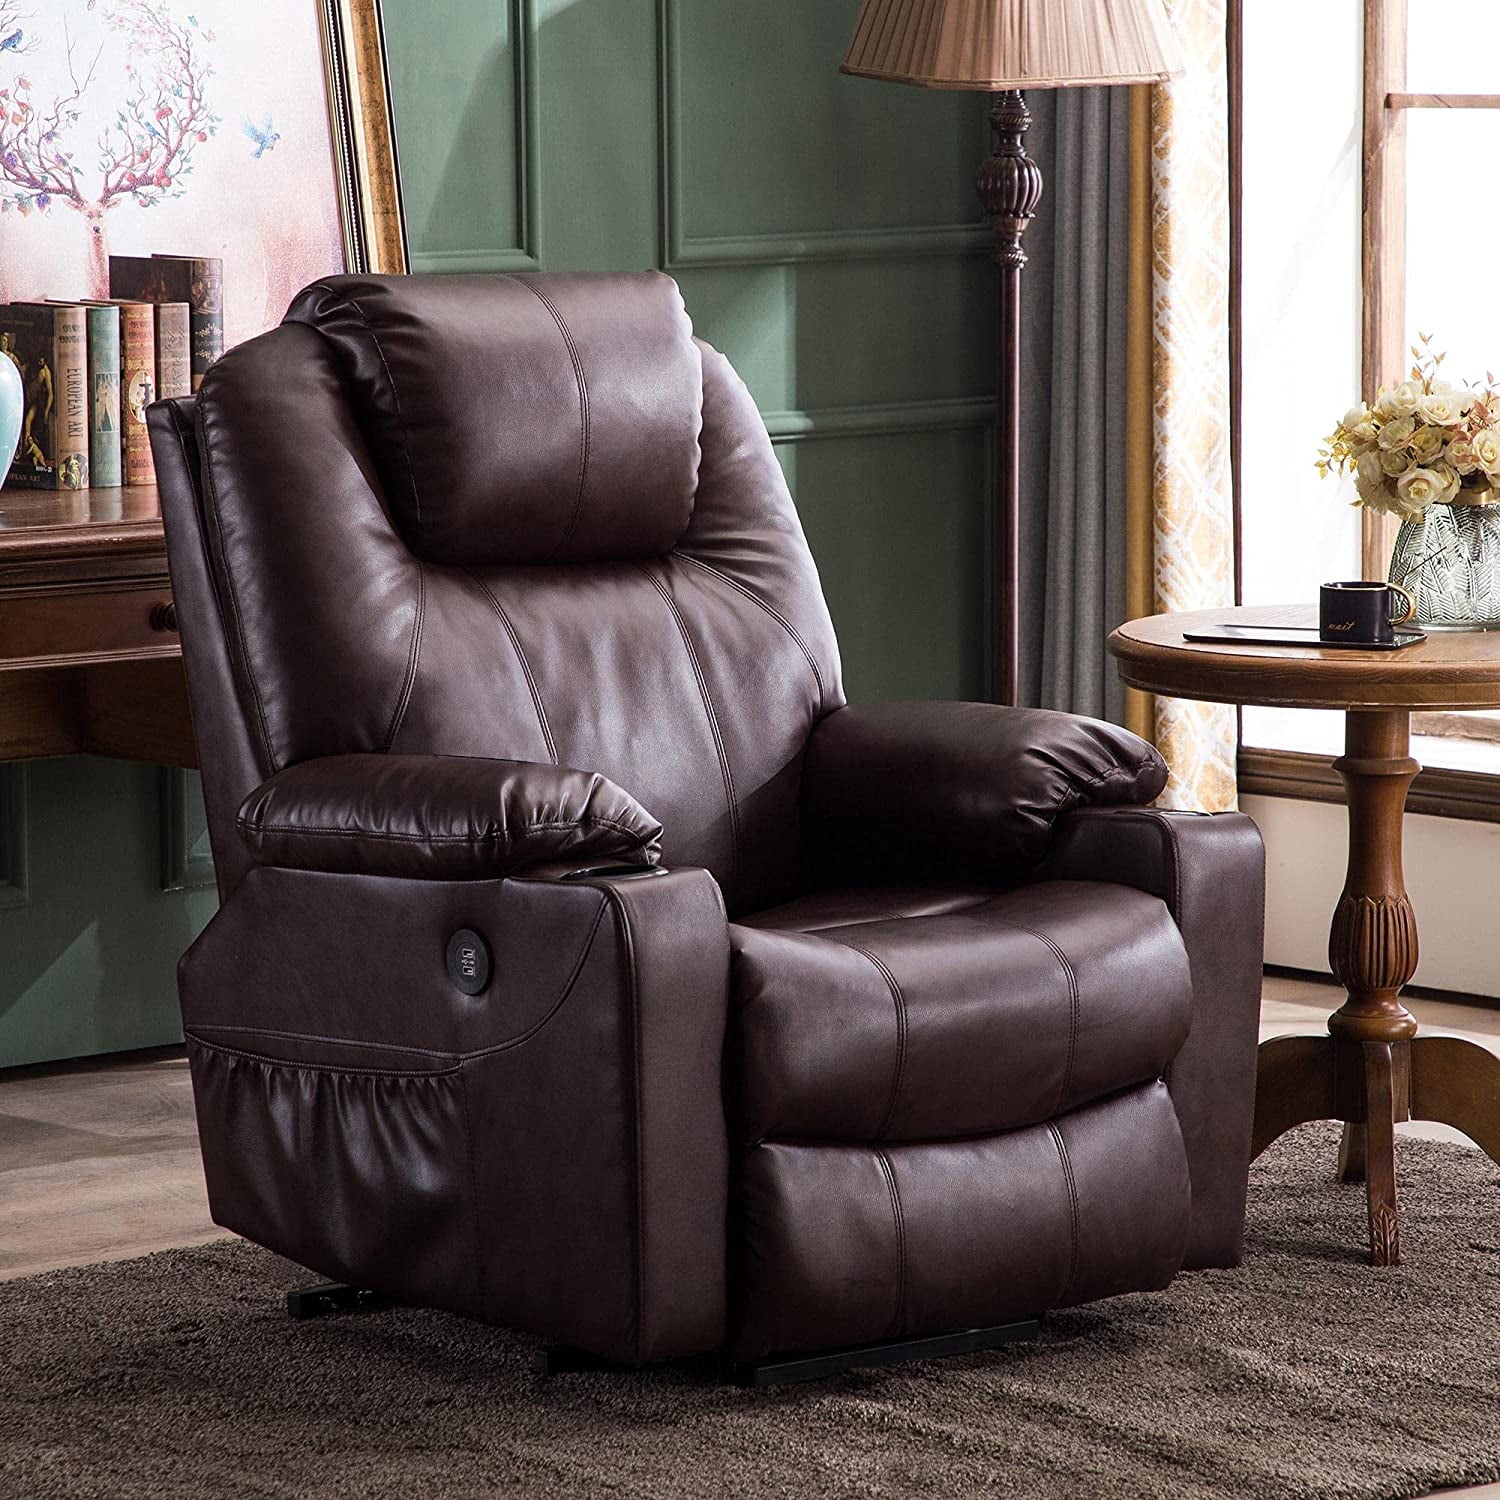 Mcombo Electric Power Recliner Chair with Massage and Heat, Extended Footrest, USB Ports, 2 Side Pockets, Cup Holders, Faux Leather 8015 (Dark Brown)